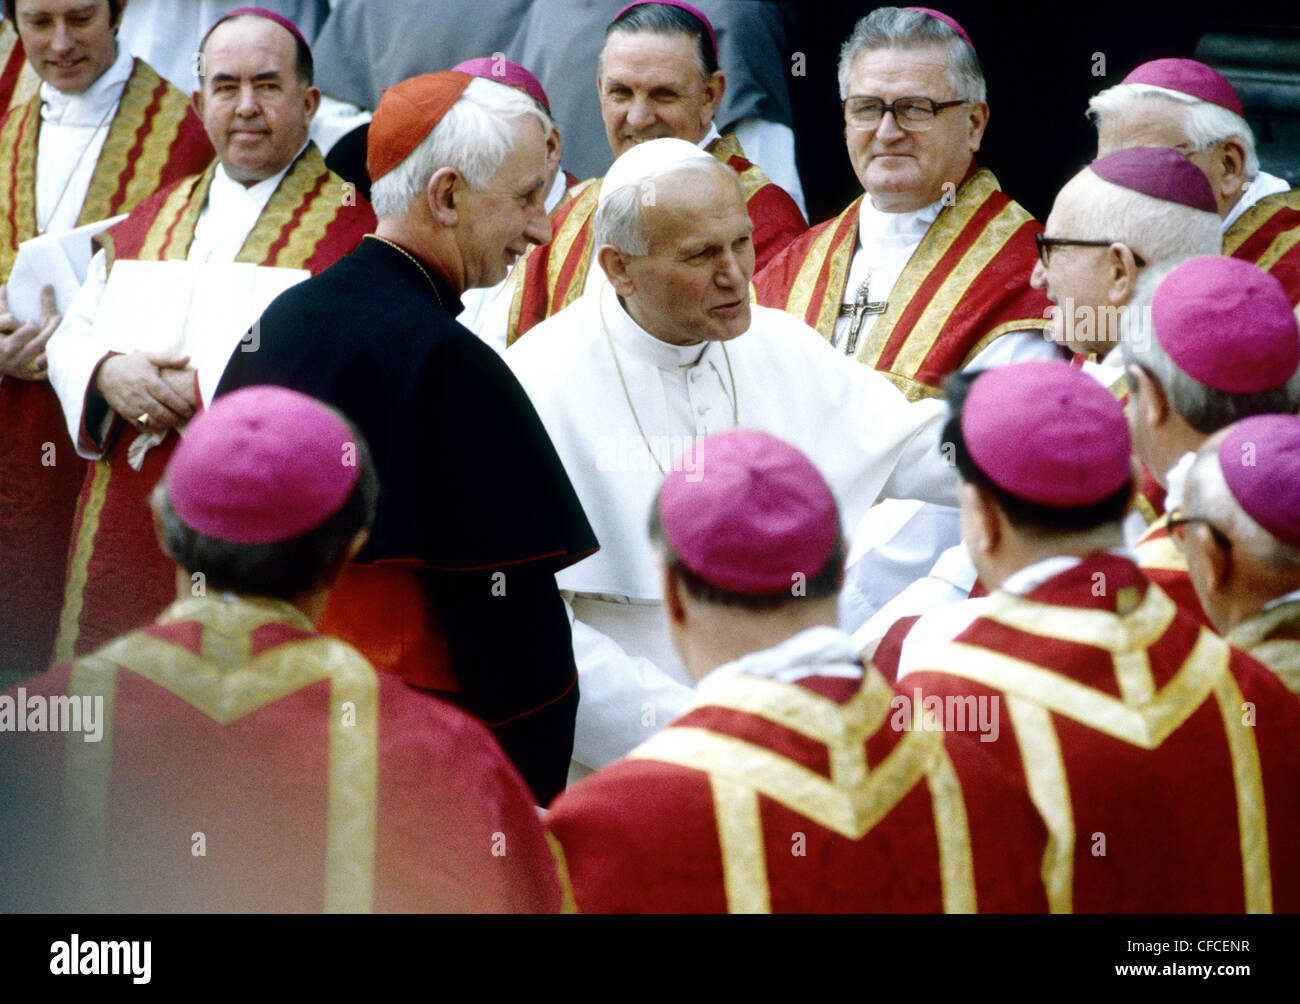 Cardinal Hume presents his fellow bishops to Pope JohnPaul during Papal Visit to Britain Stock Photo